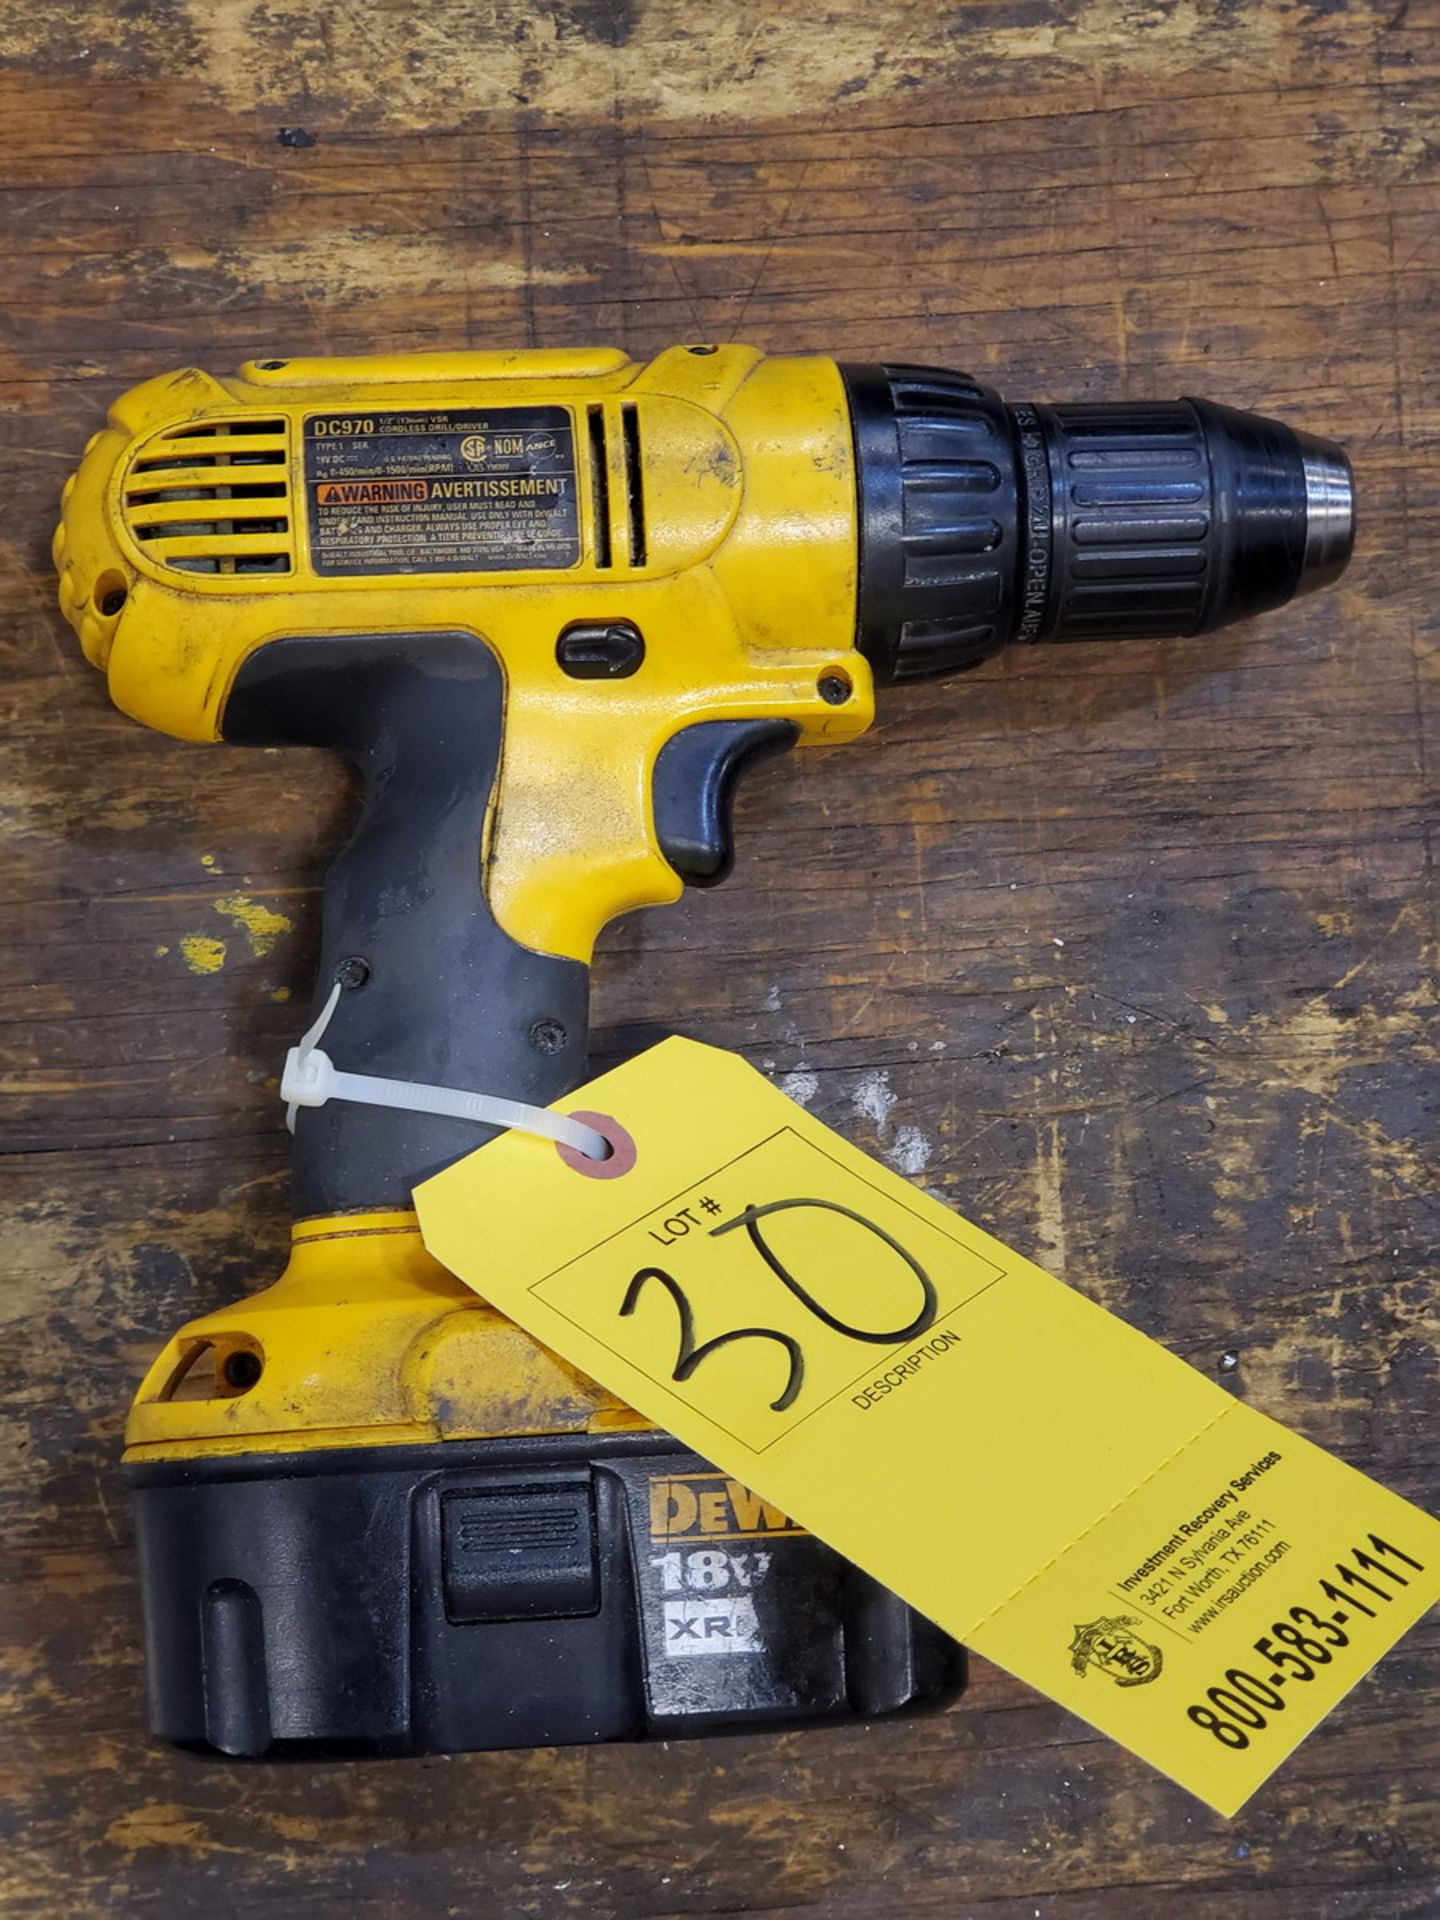 Dewalt DC970 1/2" Cordless Drill 18V, W/ Charger & Spare Battery - Image 3 of 3